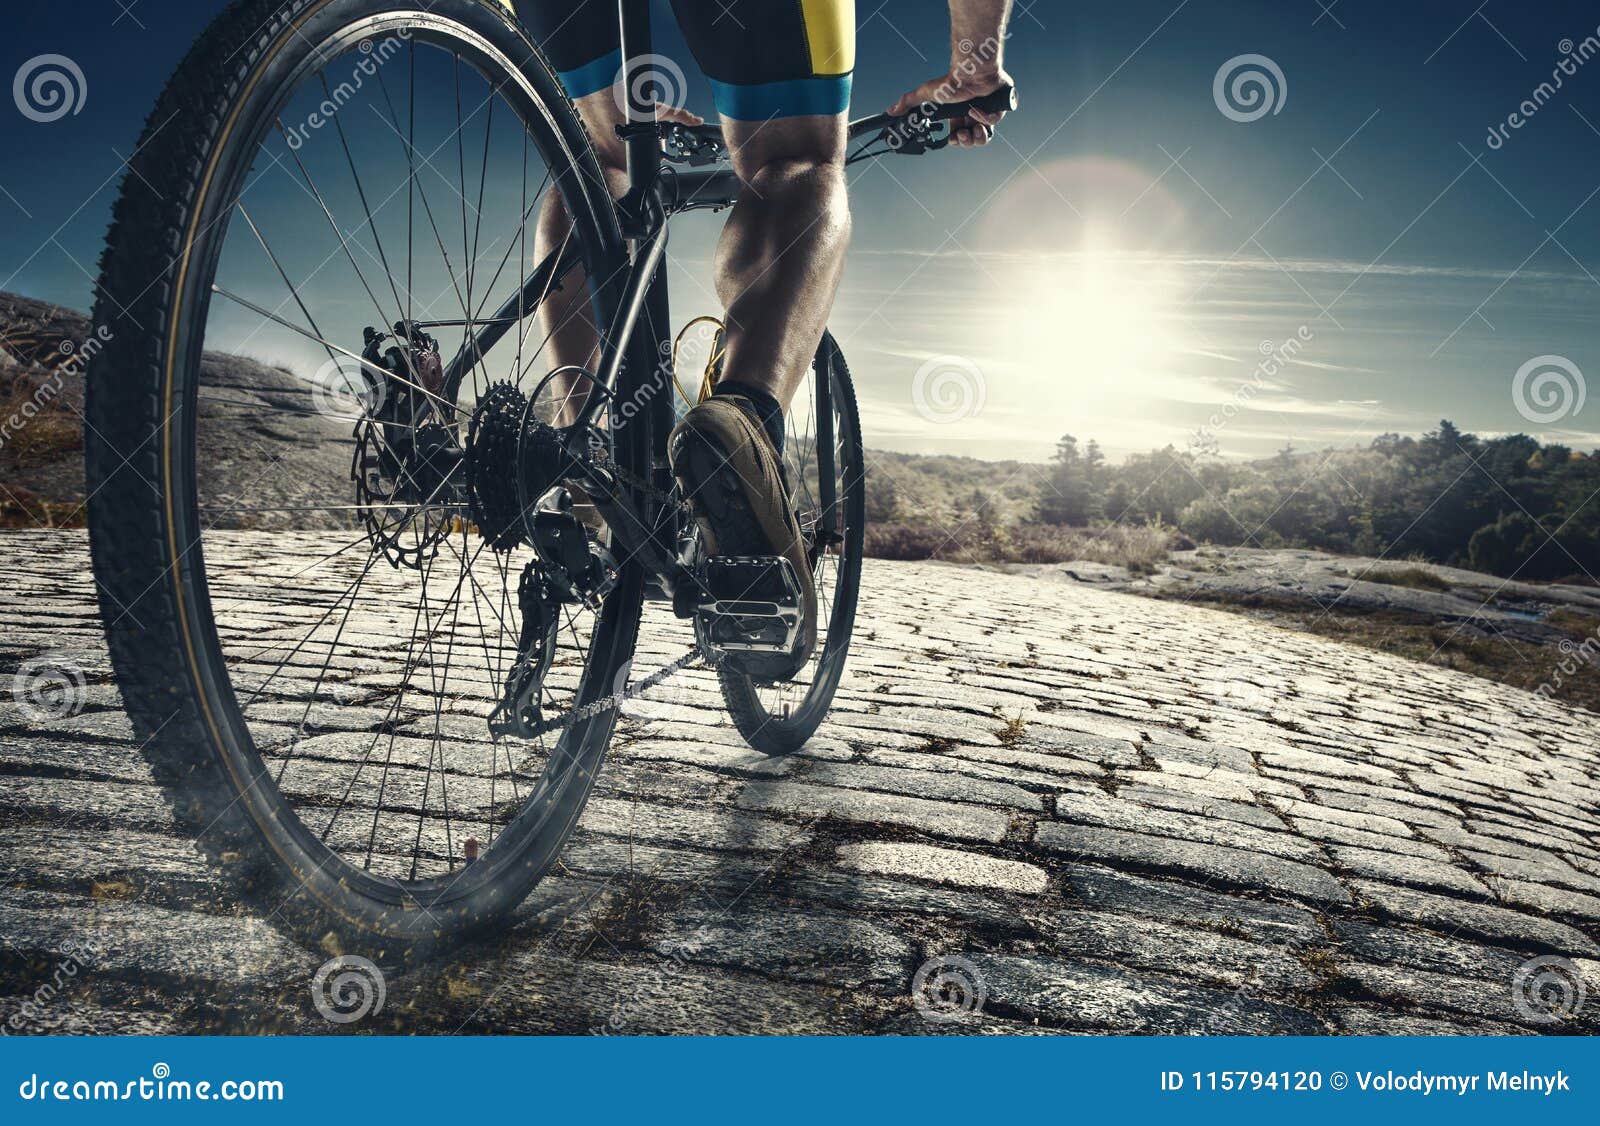 detail of cyclist man feet riding mountain bike on outdoor trail on country road